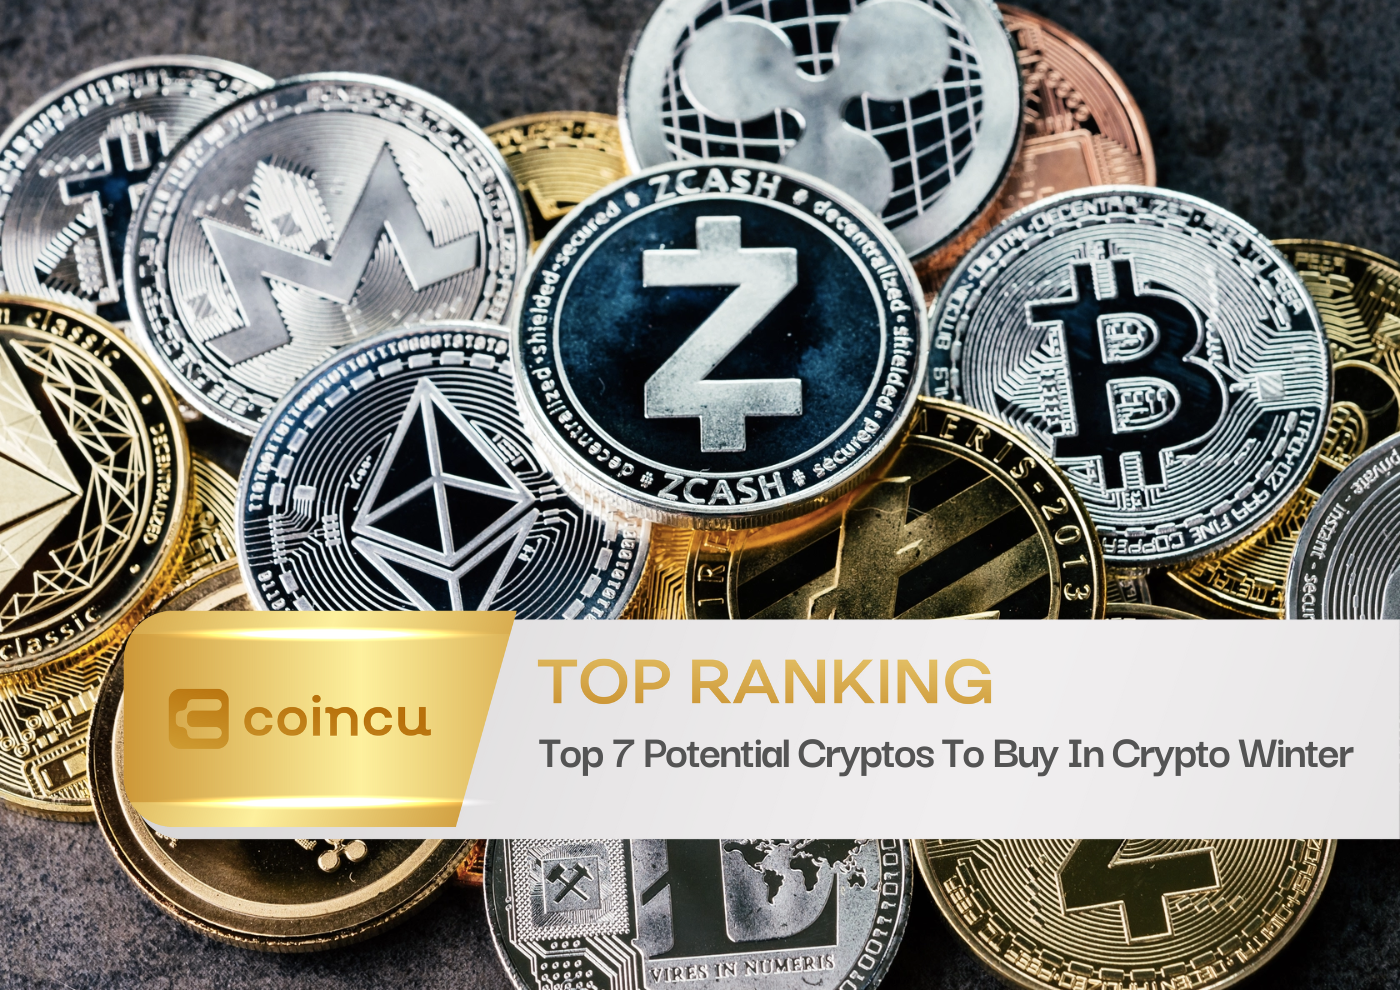 Top 7 Potential Cryptos To Buy In Crypto Winter